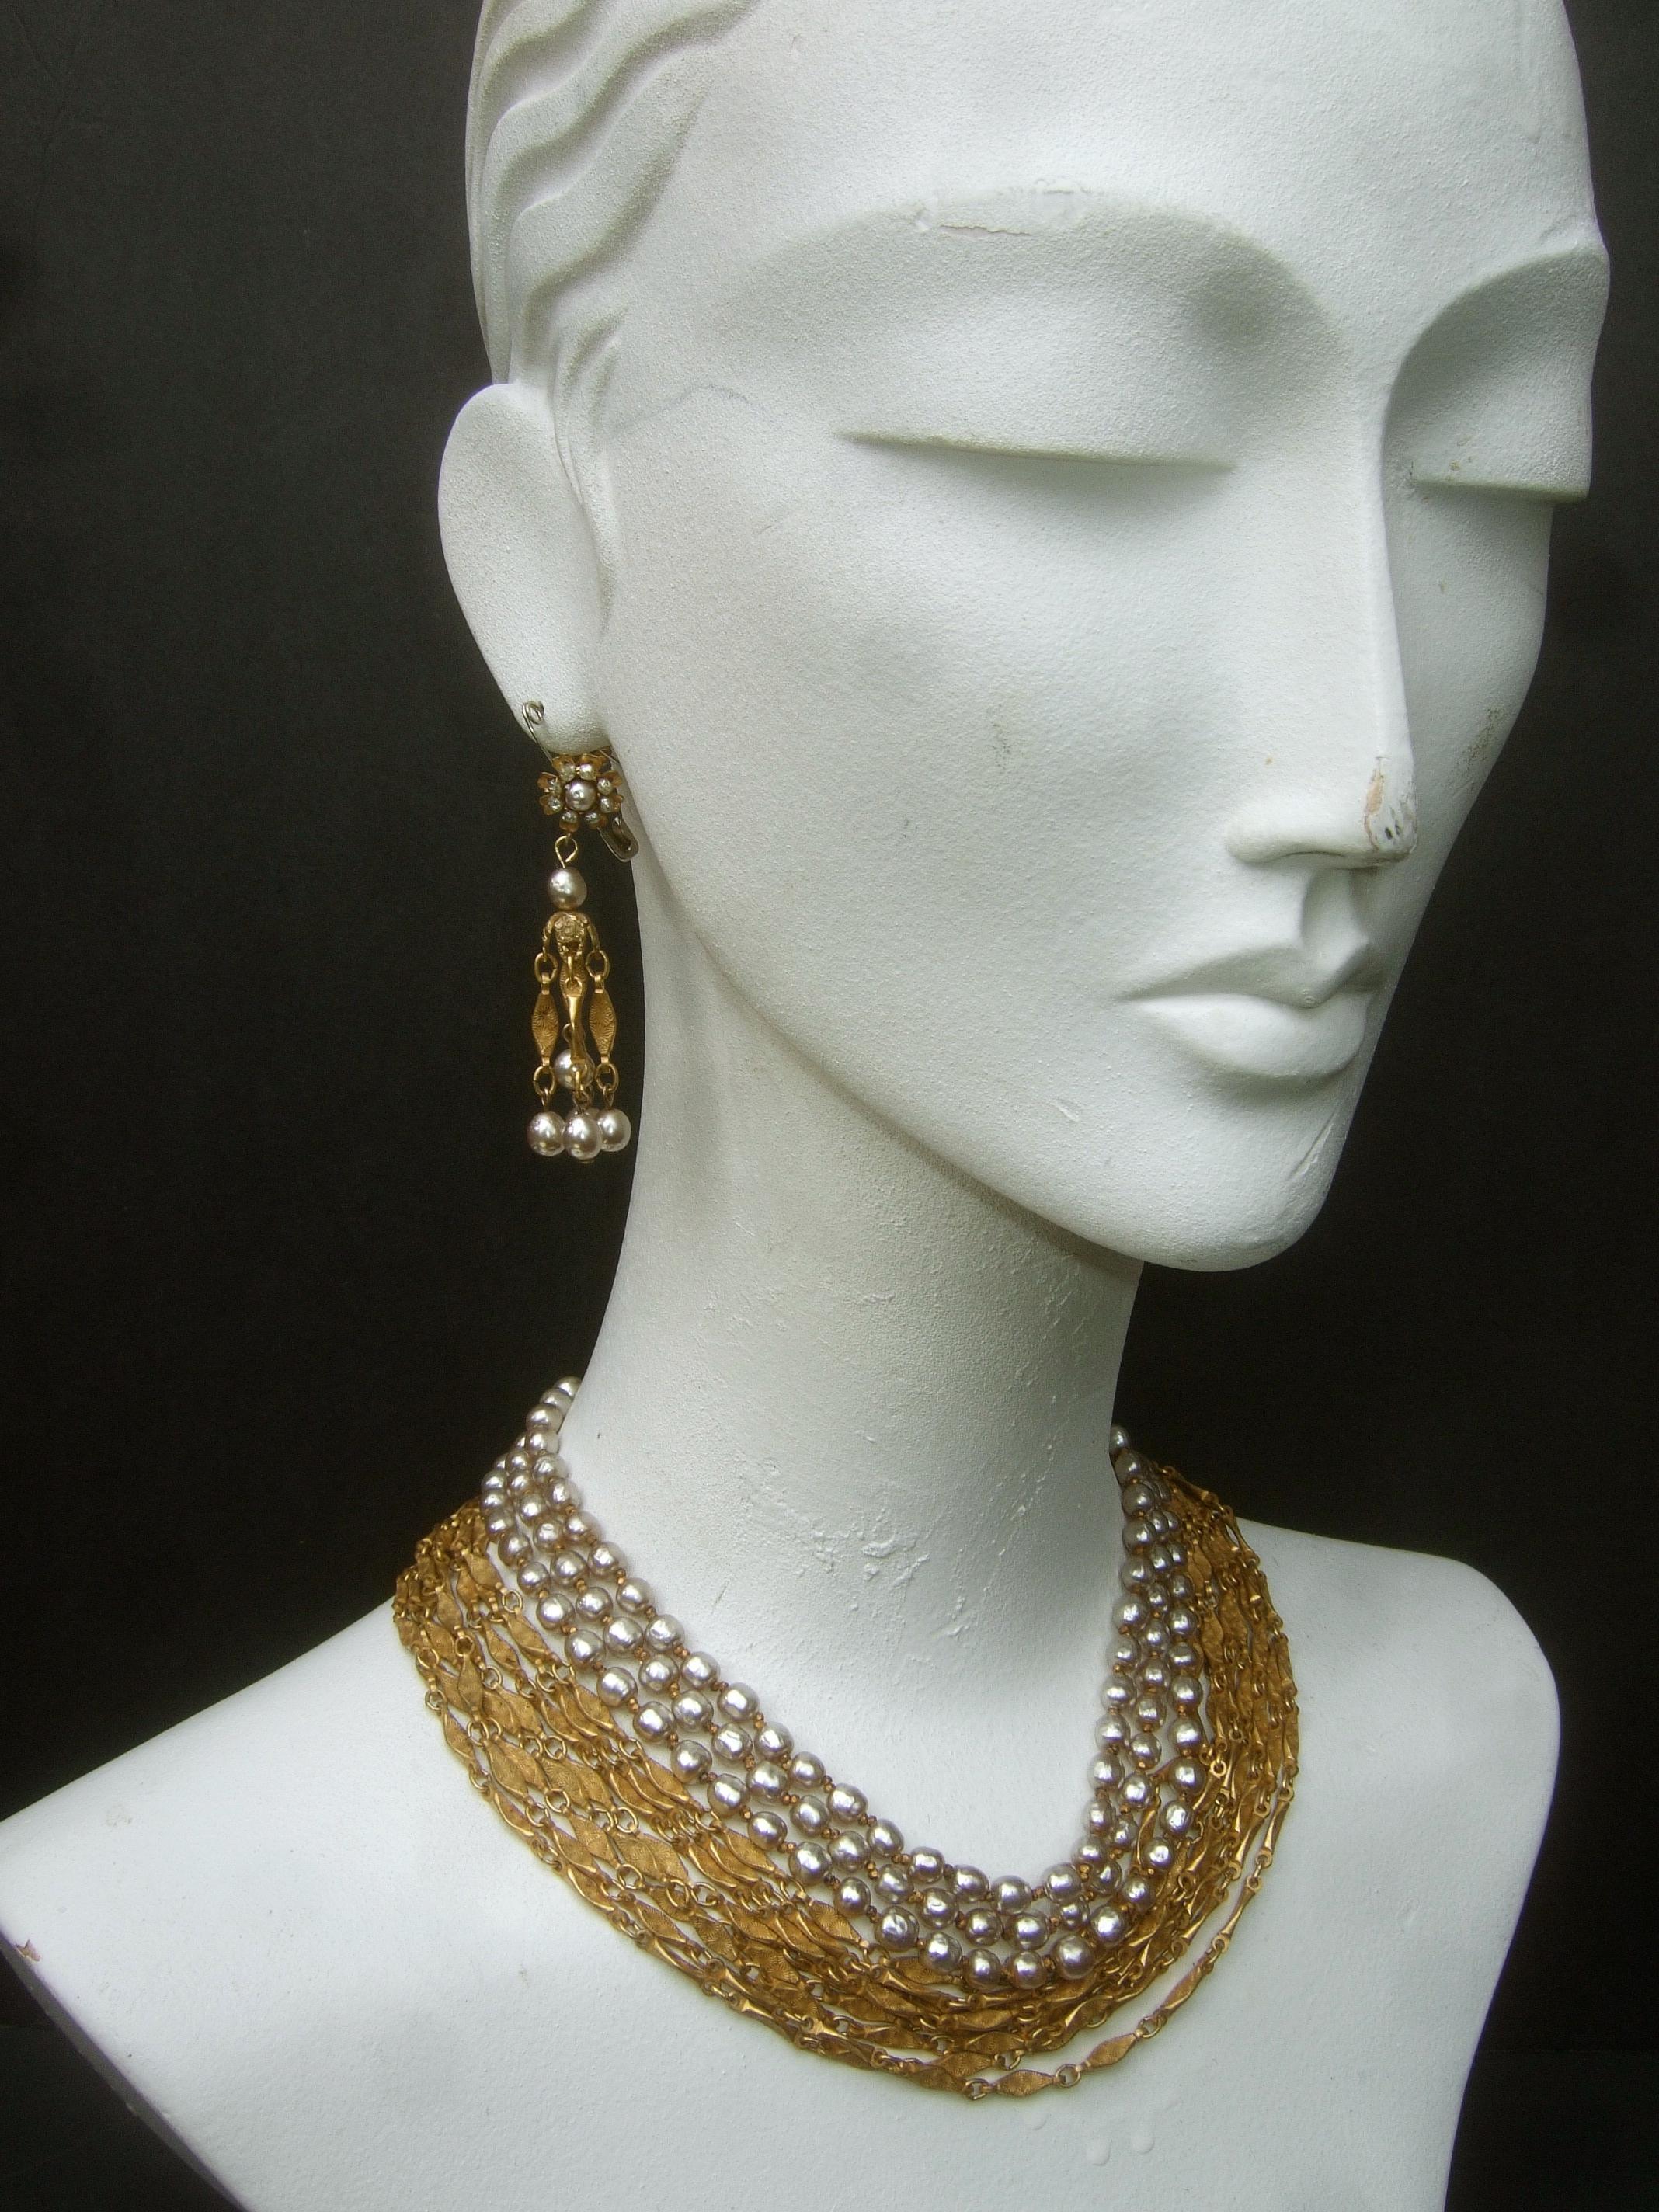 Miriam Haskell Exquisite glass baroque pearls & chains choker necklace & earrings set c 1960s
The elegant graduated choker necklace is comprised of three rows of glass enamel baroque style pearls
Embellished with eight rows of graduated gilt metal